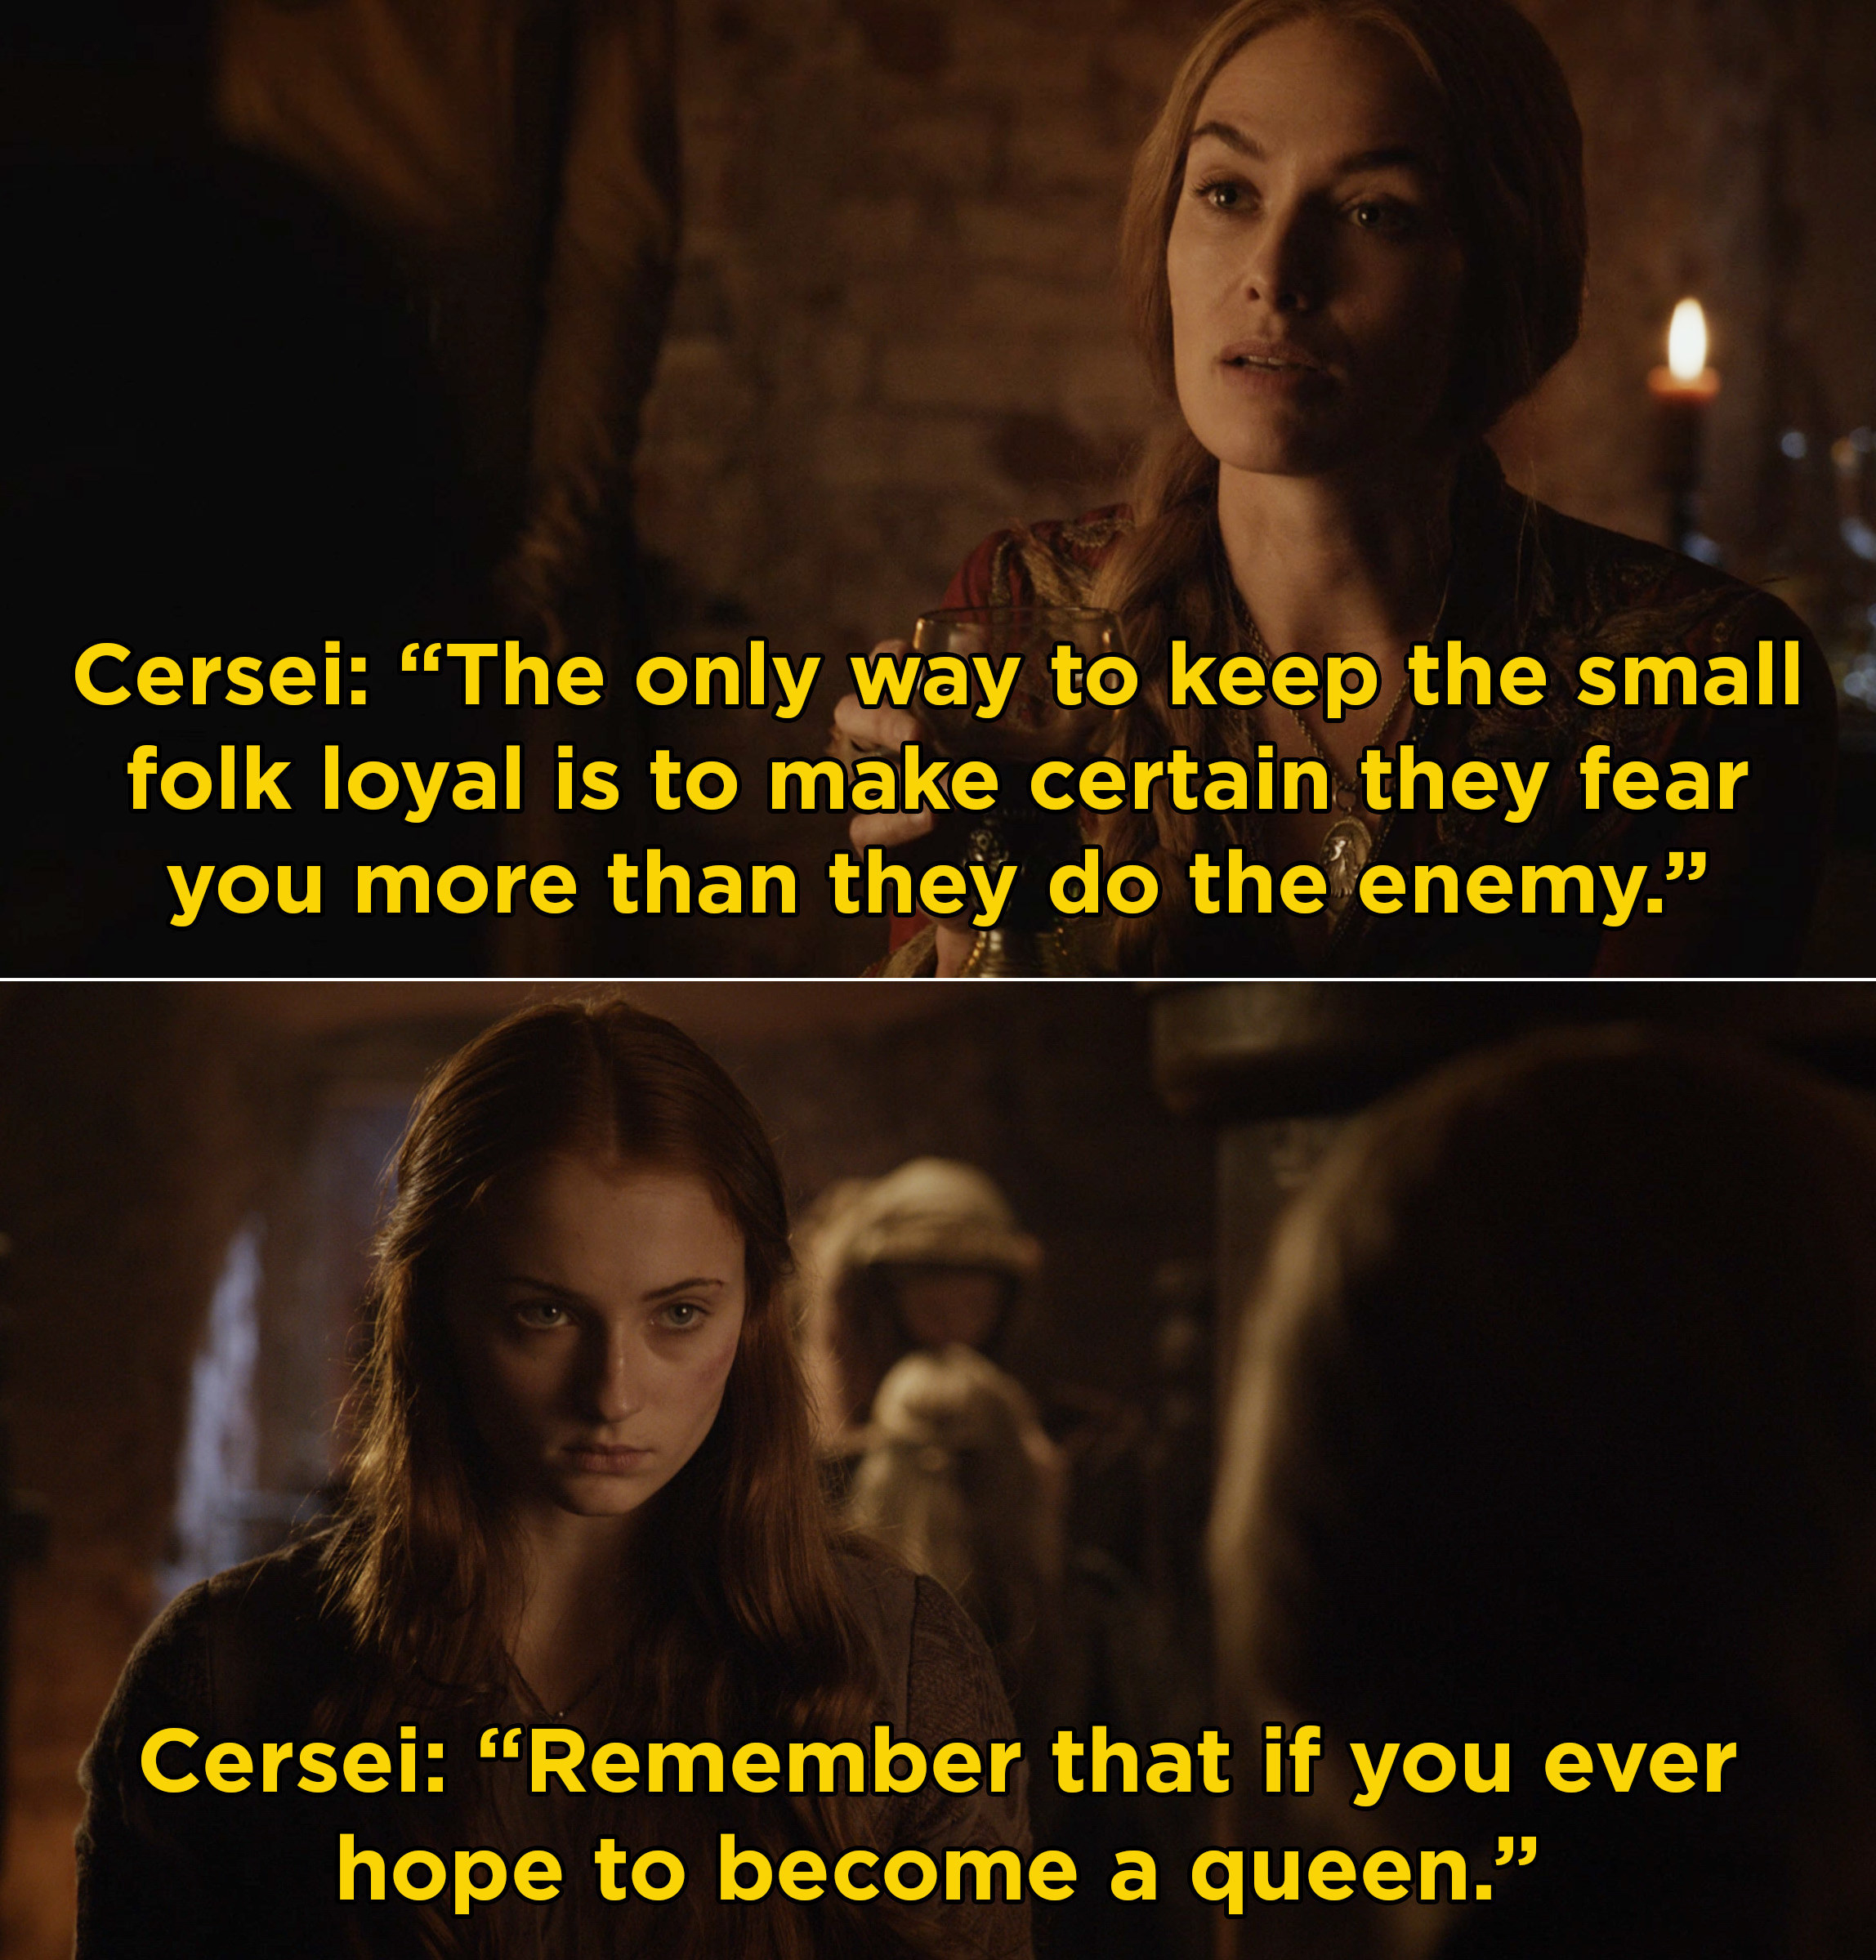 Cersei telling Sansa &quot;The only way to keep the small folk loyal is to make certain they fear you more than they do the enemy&quot;